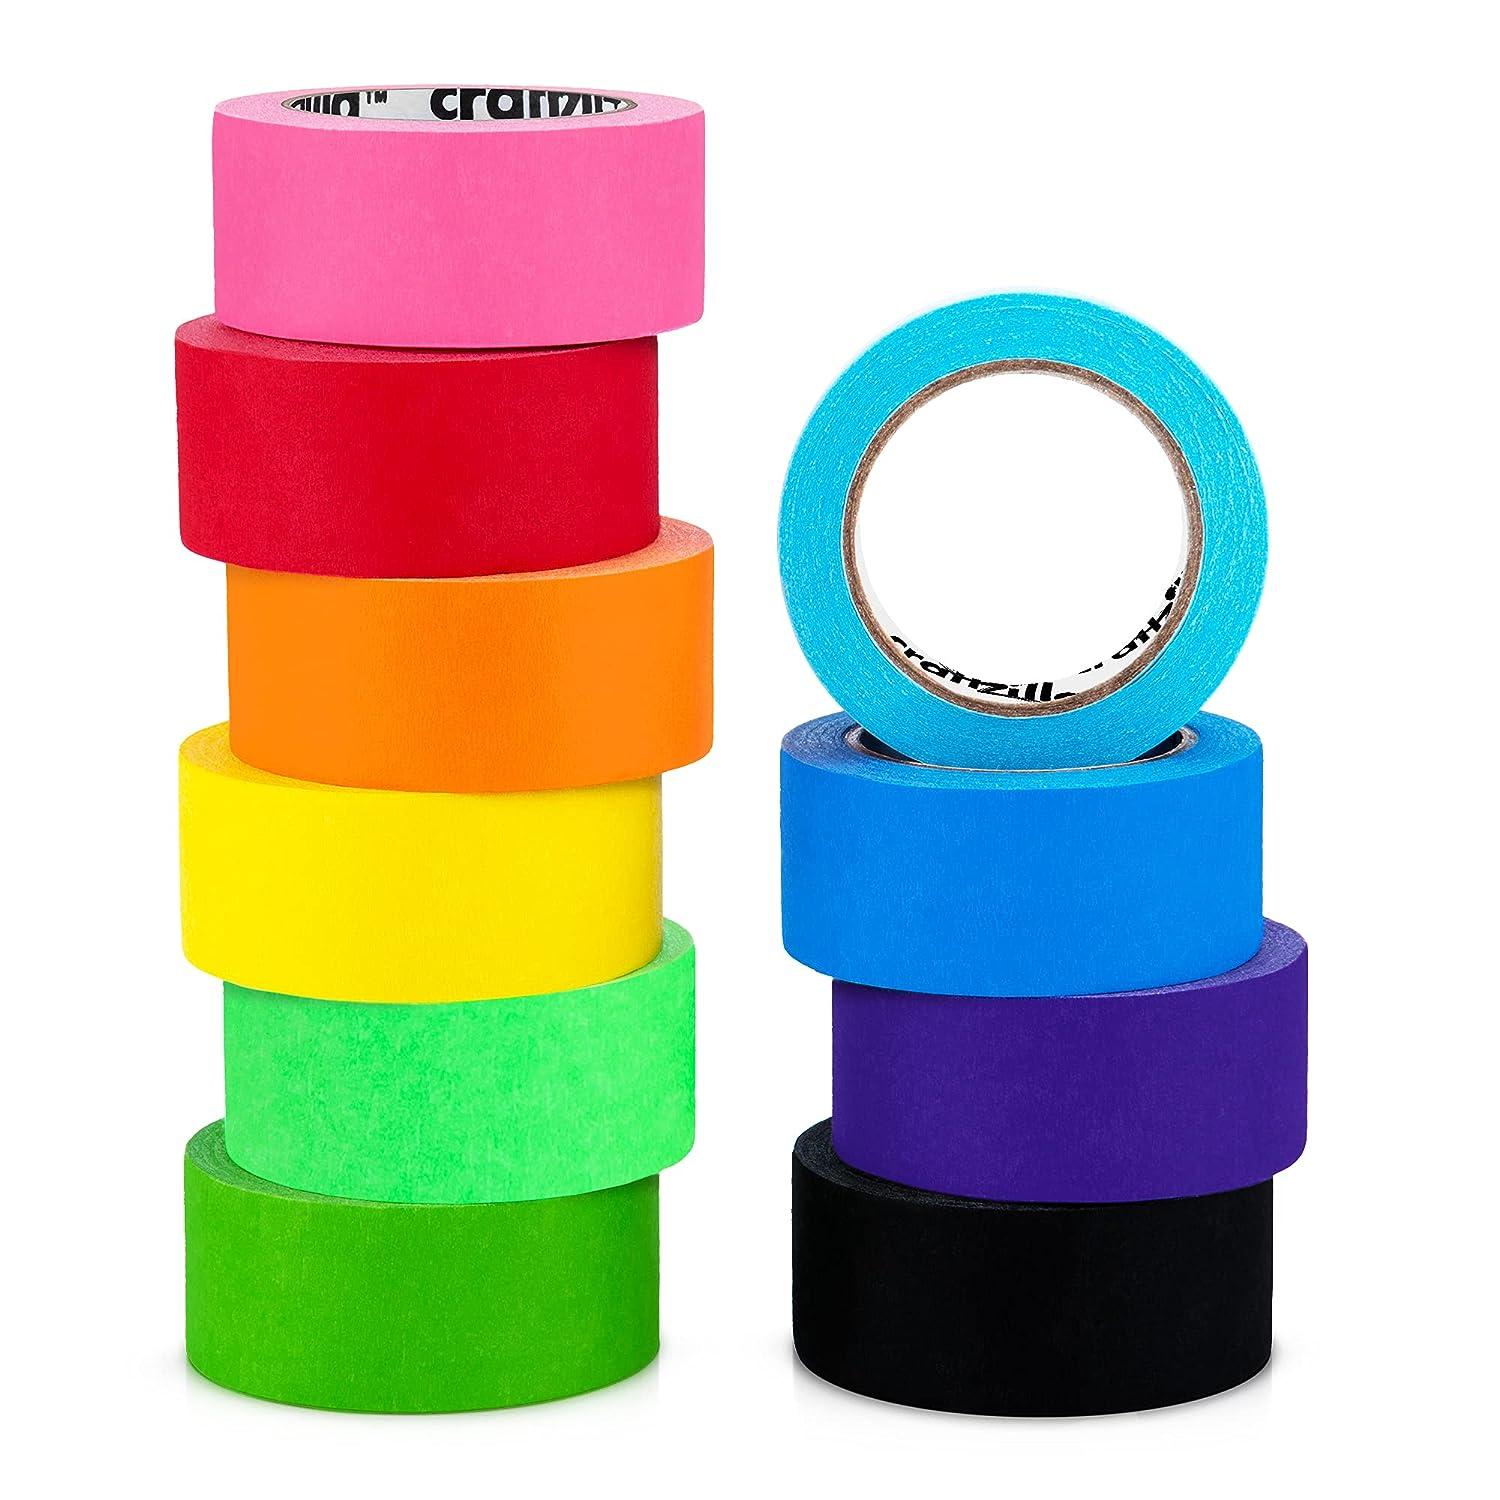  Craftzilla Colored Masking Tape - 11 Rolls, 55 yd x 1 in Each  Tape - 1,815 Feet x 1 Inch of Colorful Craft Tape - Vibrant Rainbow Color  Teacher Tape –